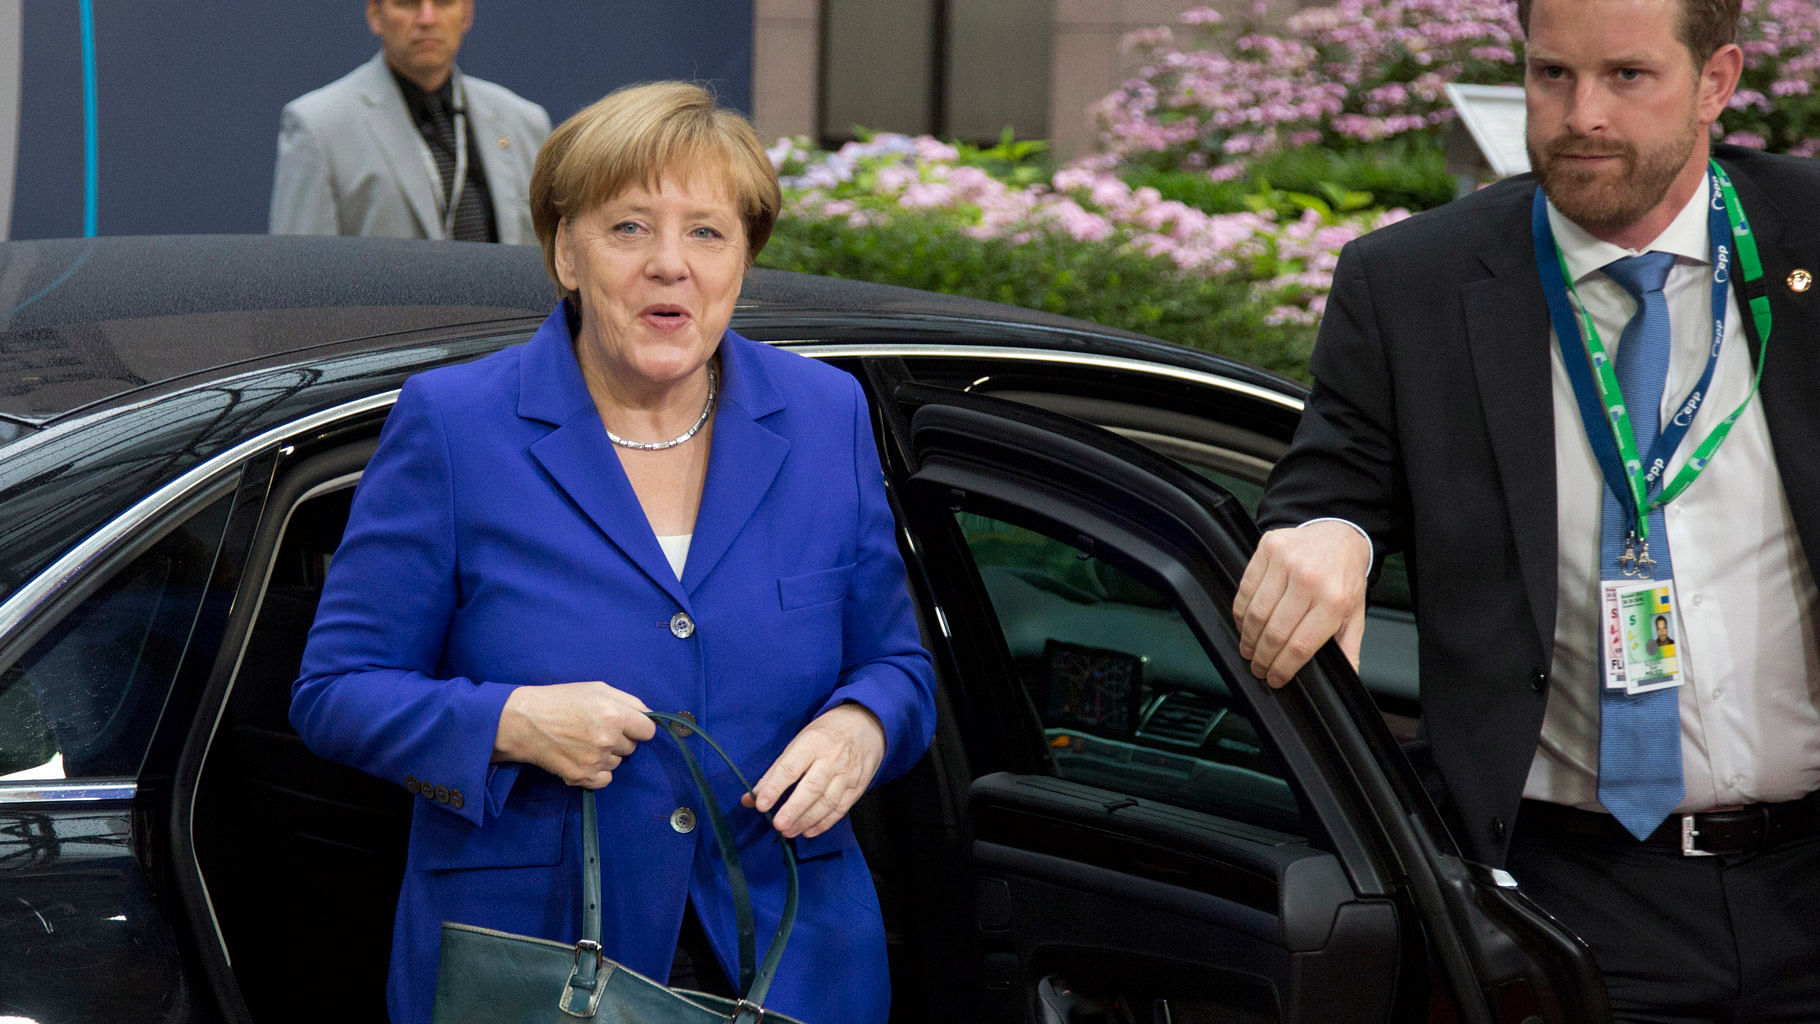 German Chancellor Angela Merkel arrives for an EU summit in Brussels on Wednesday. (Photo: AP)